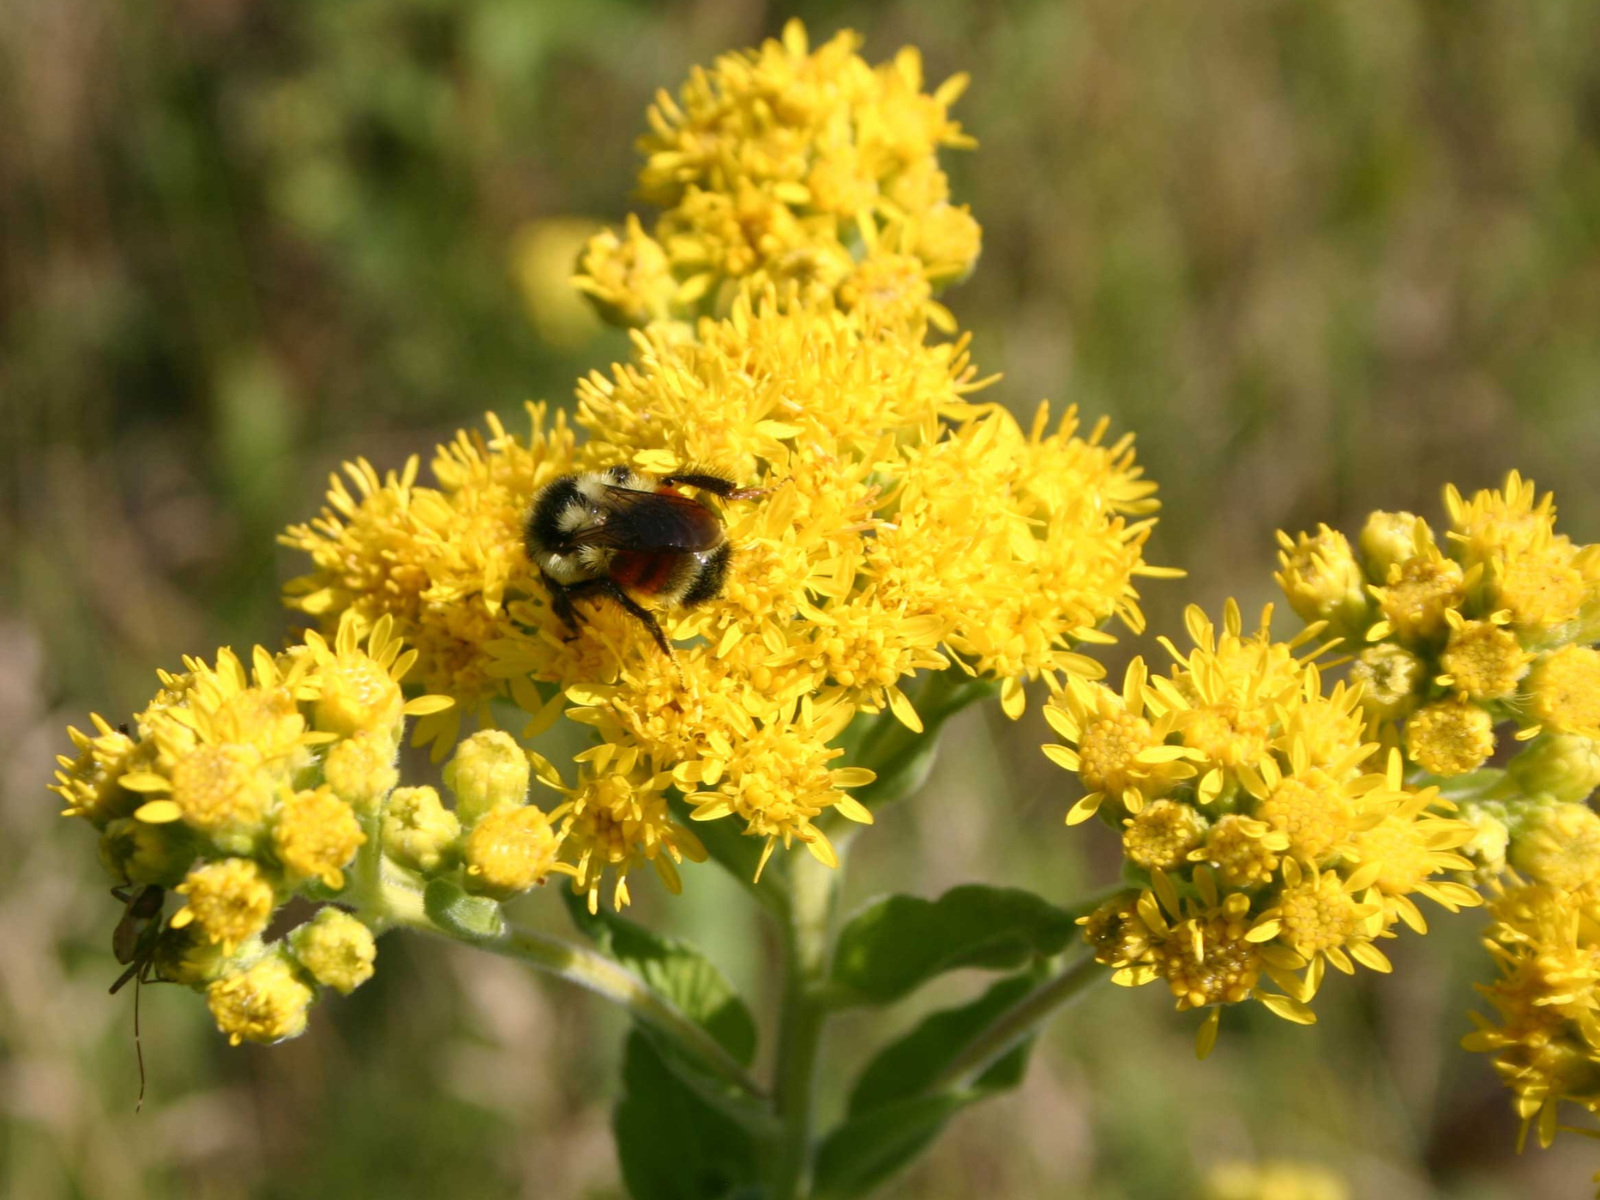 A fluffy yellow and black bumblebee perched on a cluster of fluffy yellow flowers.